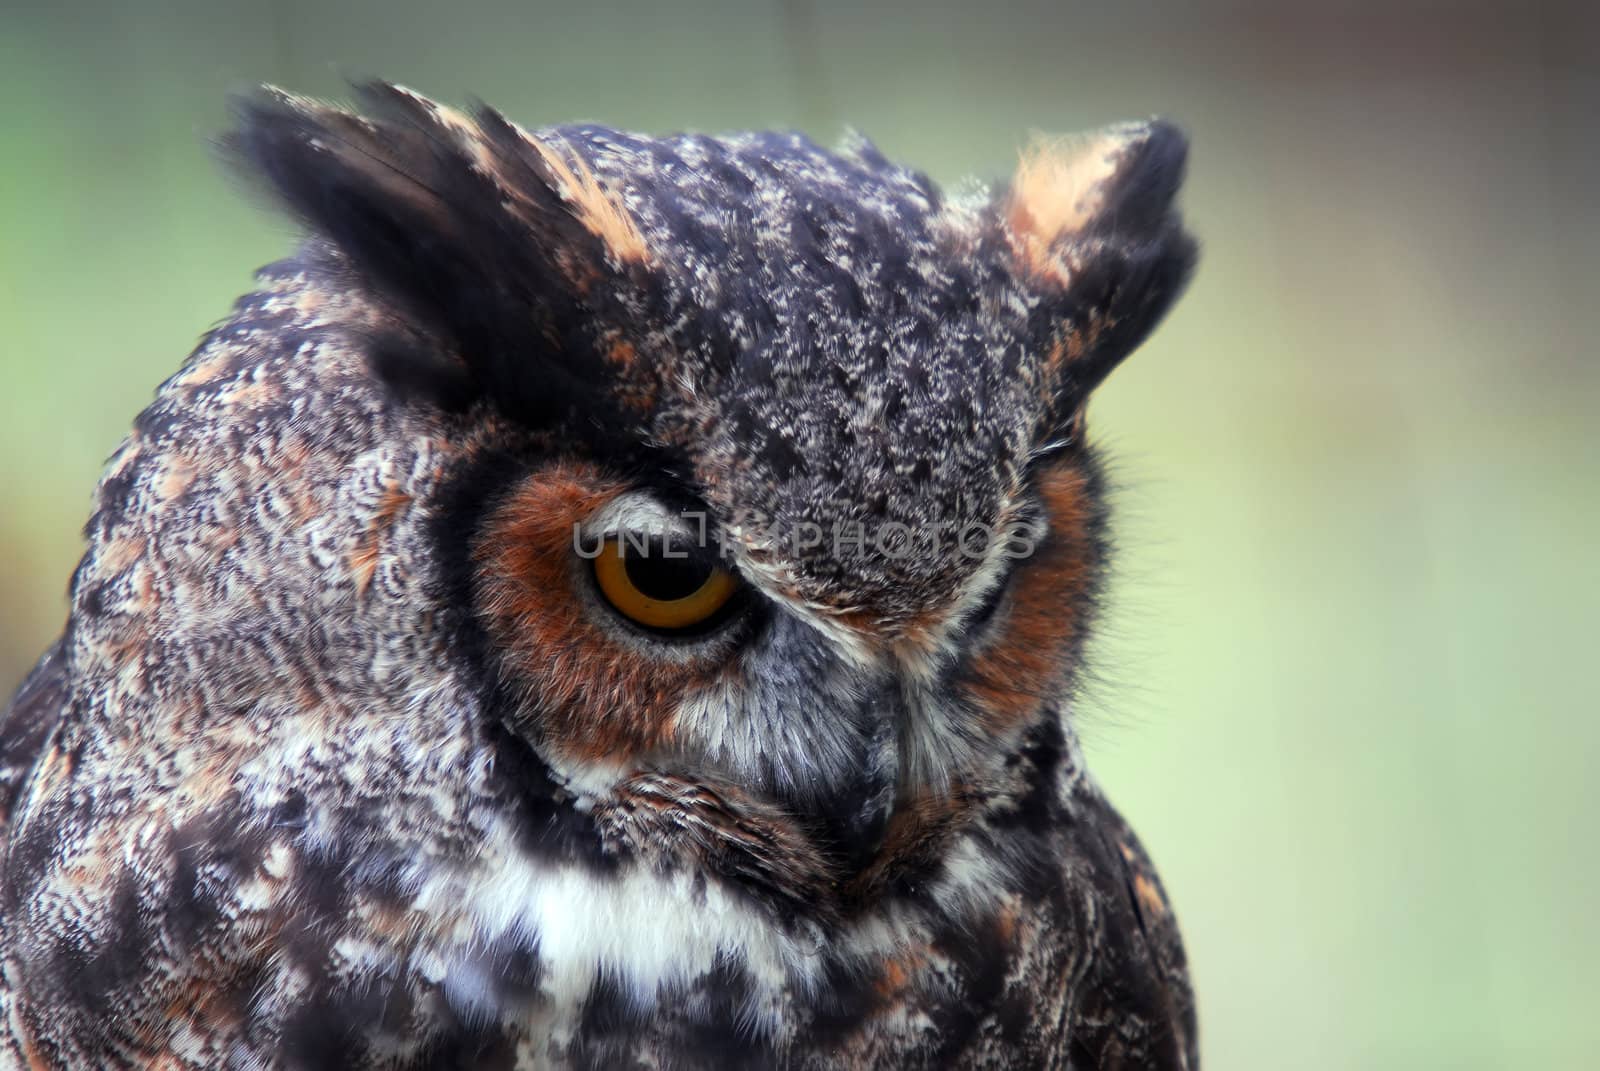 Close-up portrait of a Great Horned Owl (Bubo virginianus)